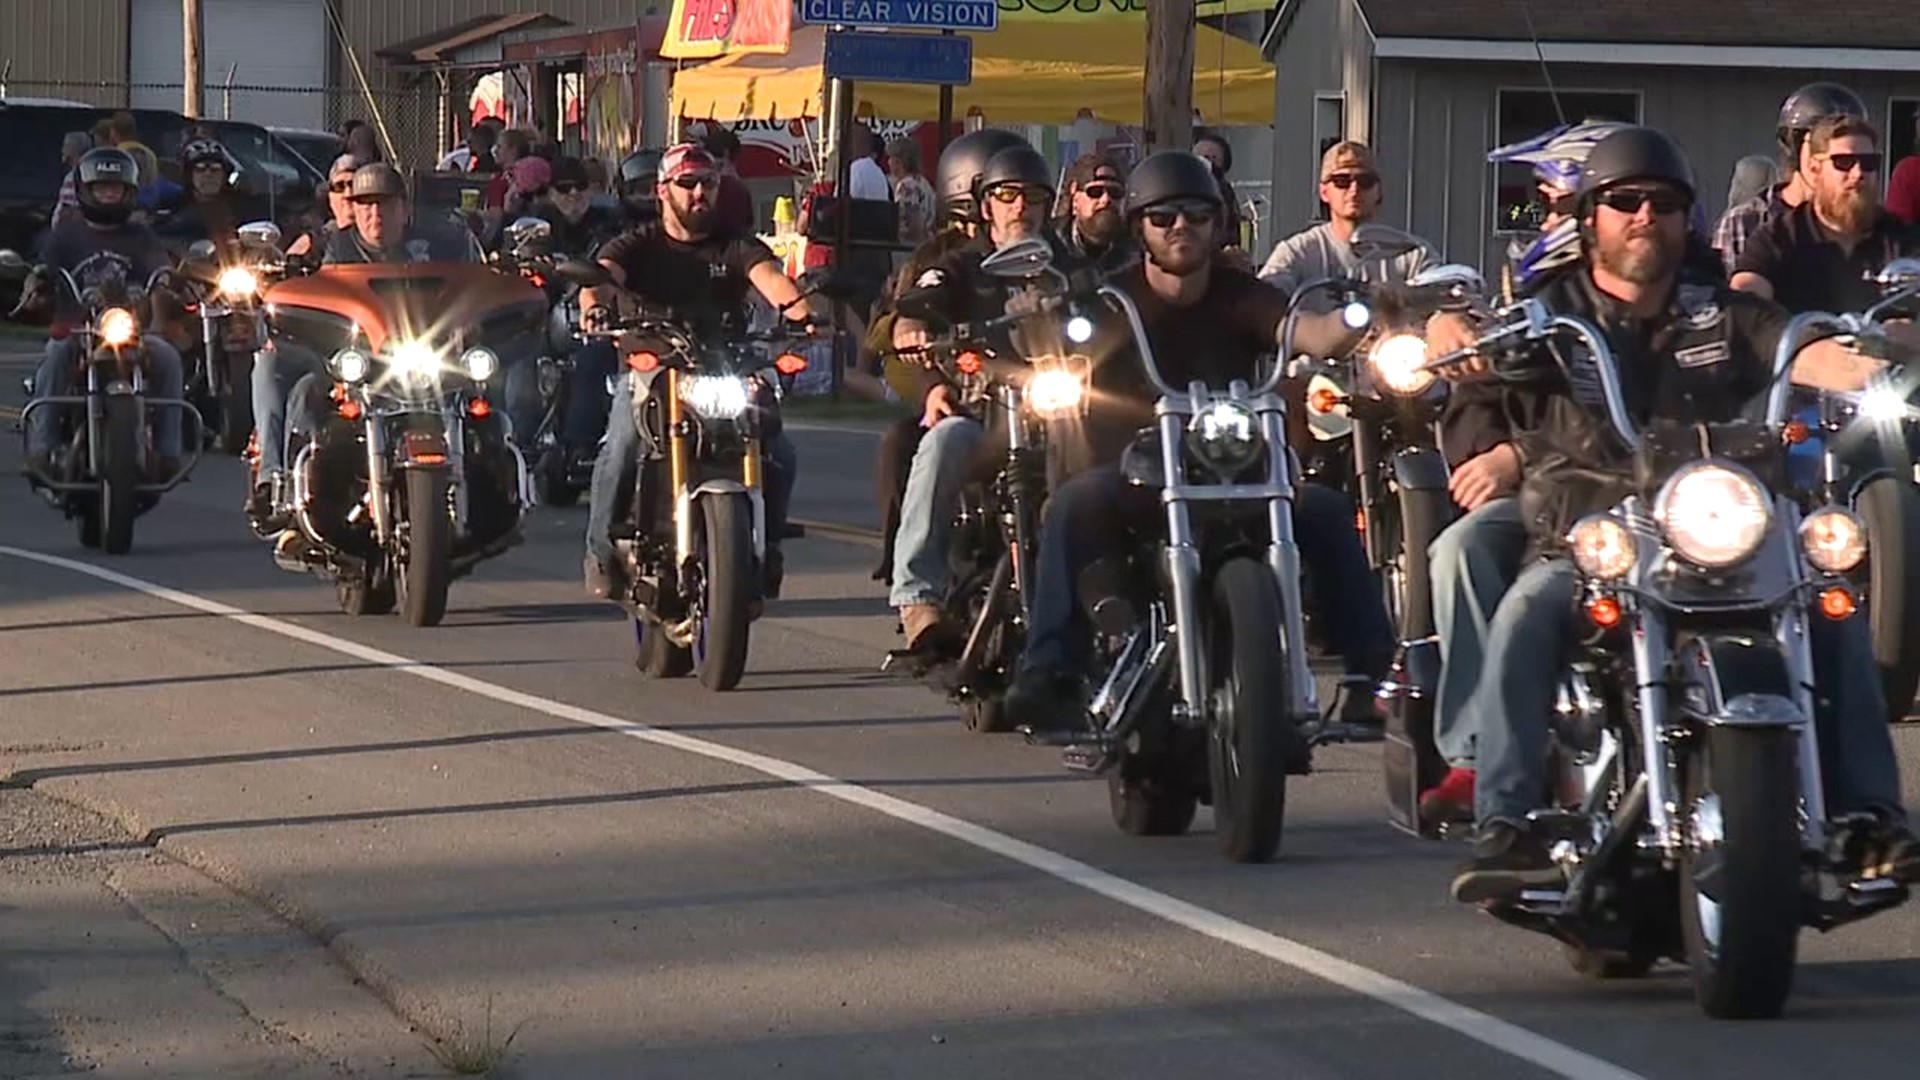 One of the largest motorcycle rides in the country took place in Lycoming County on Monday honoring those who lost their lives in the September 11 terrorist attacks.